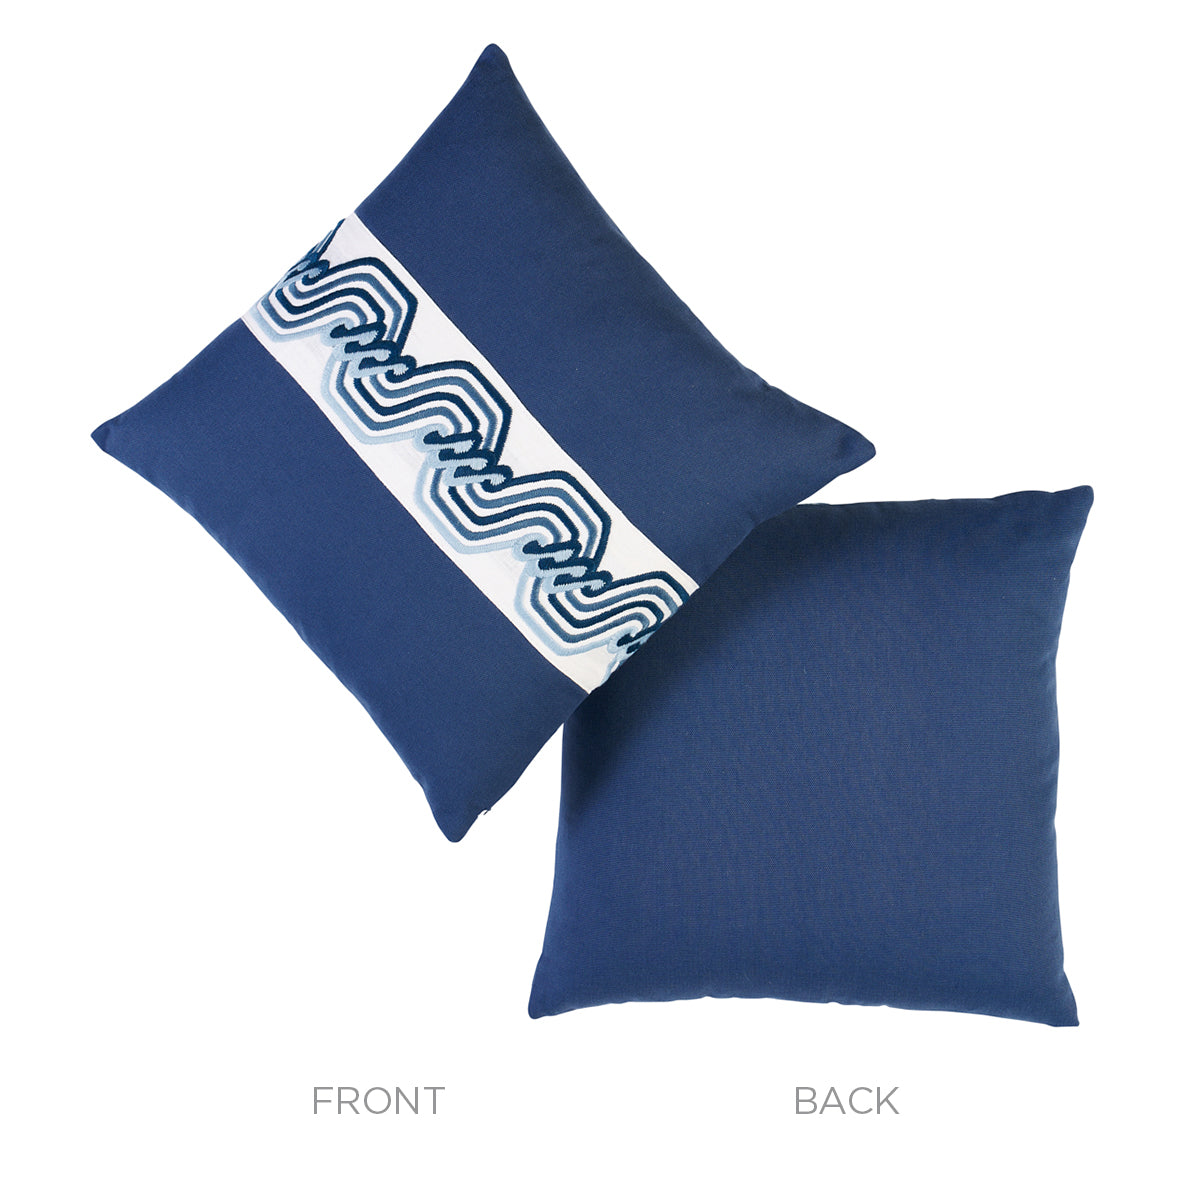 The Twist Embroidered Pillow | Marine